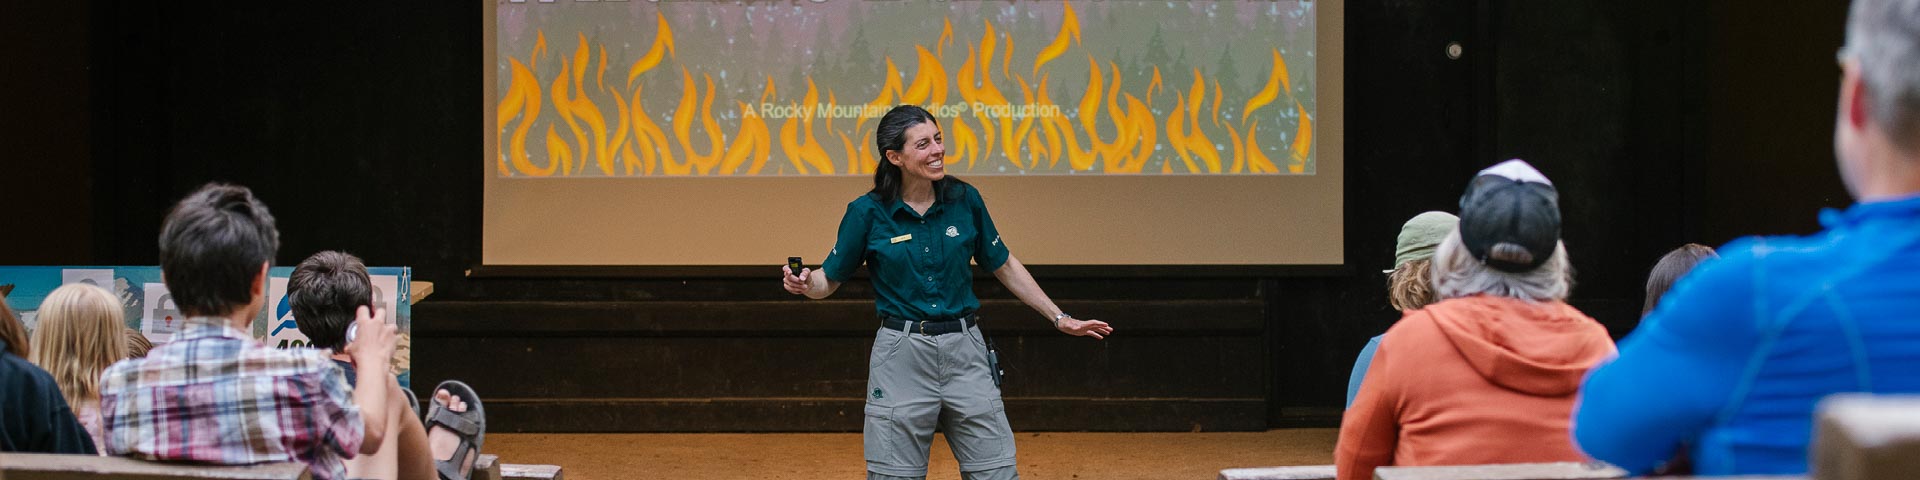 Parks Canada staff performing a show